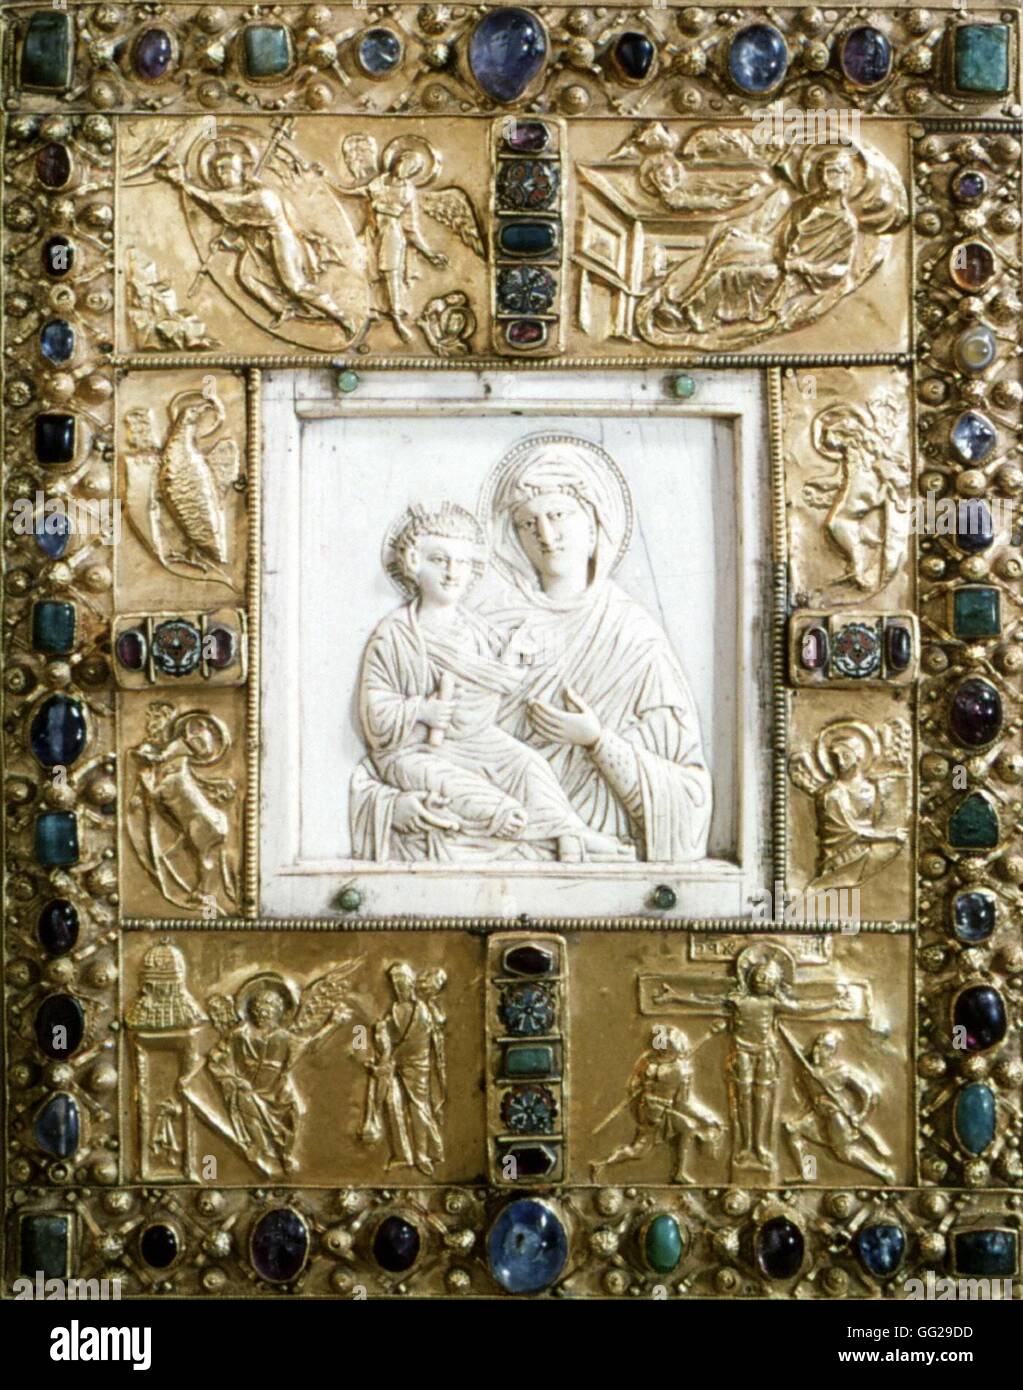 Aachen Treasure Gold book-binding with precious stones. In the center: Virgin and Child in ivory, Detail : the siege of Pamplona.  ca. 1020 Middle Ages Germany Germany / Aachen Cathedral Stock Photo